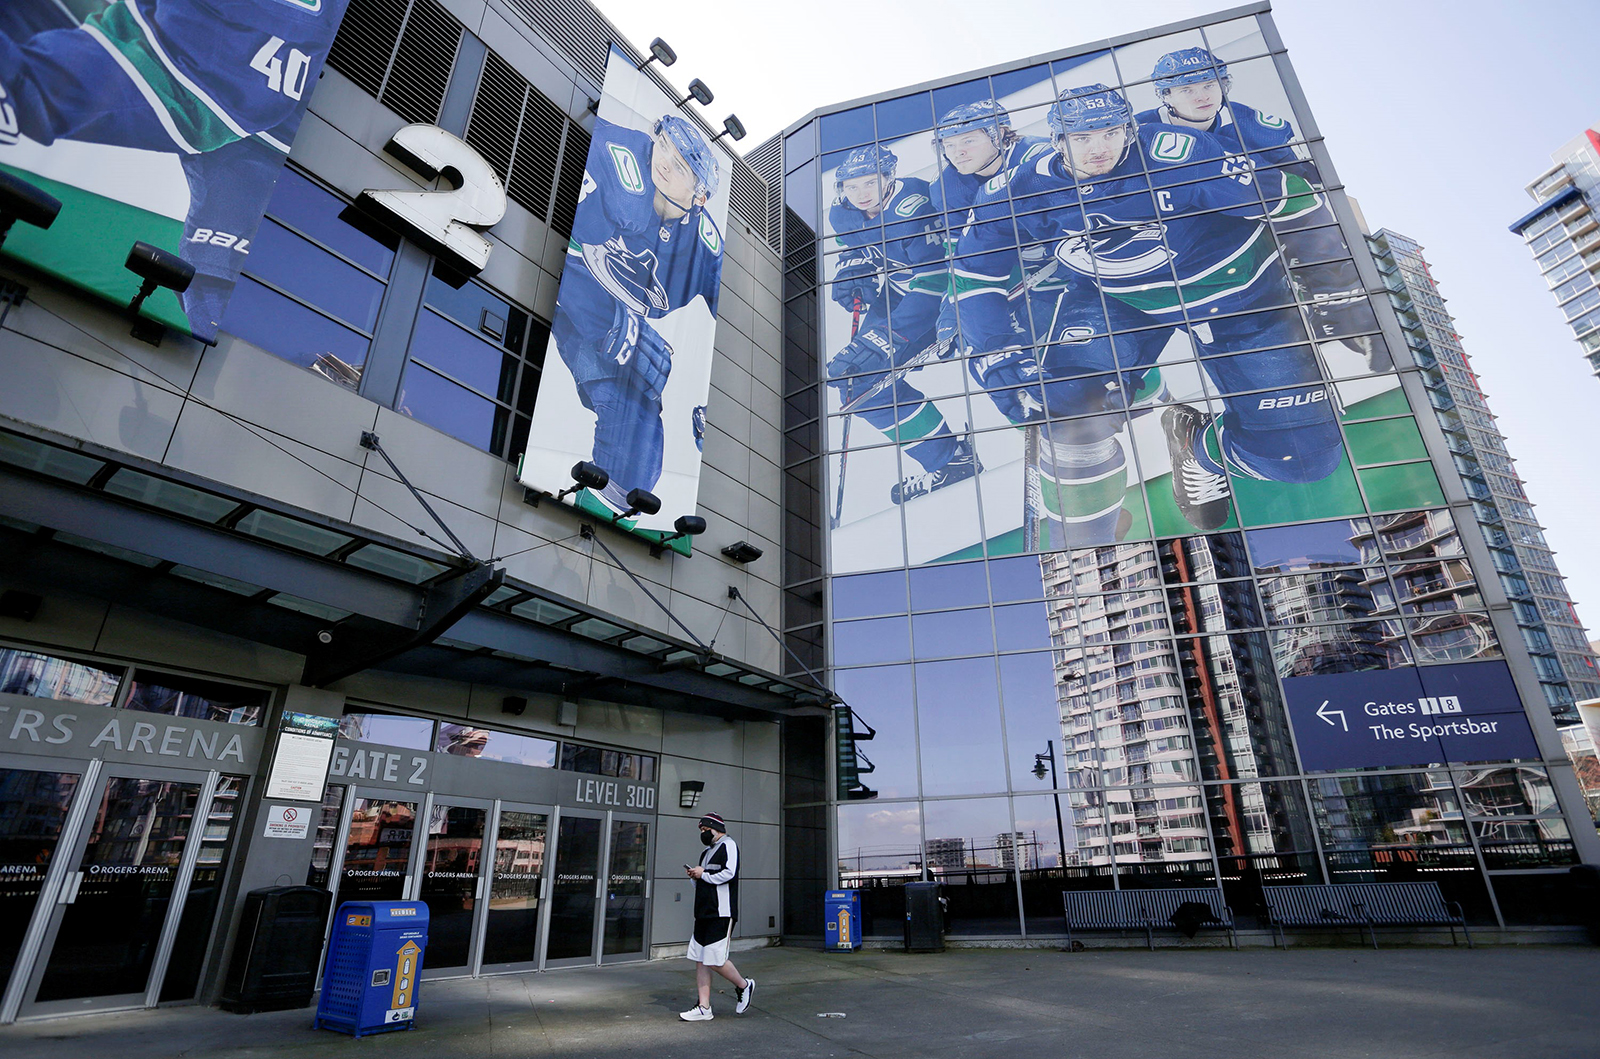 Giant posters of the Canucks players are seen at the entrance of Rogers Arena in Vancouver, British Columbia, Canada, April 5.